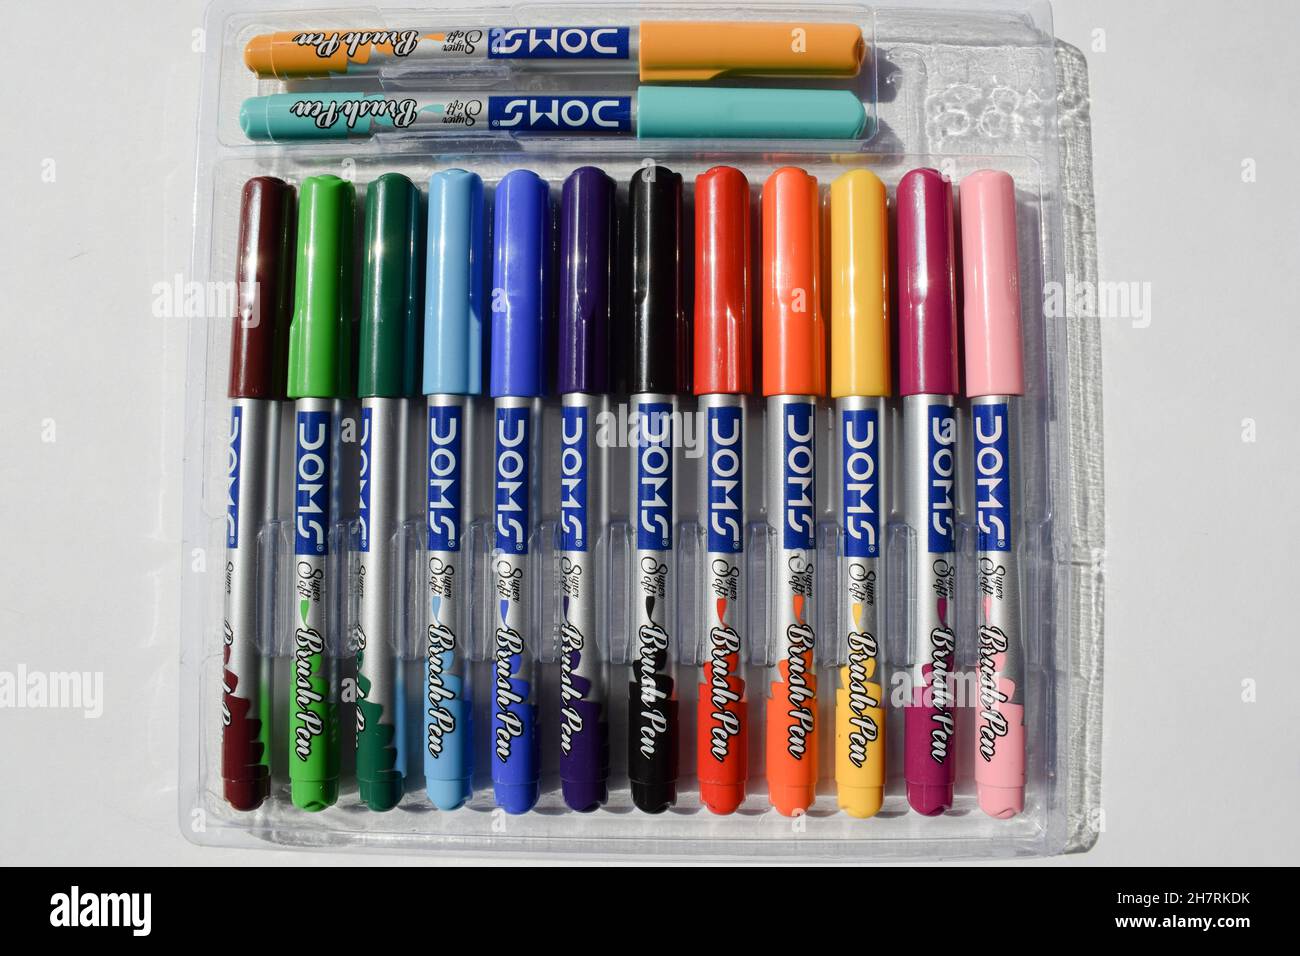 Doms brand Colored Brush pens pack of 14 pens in transparent